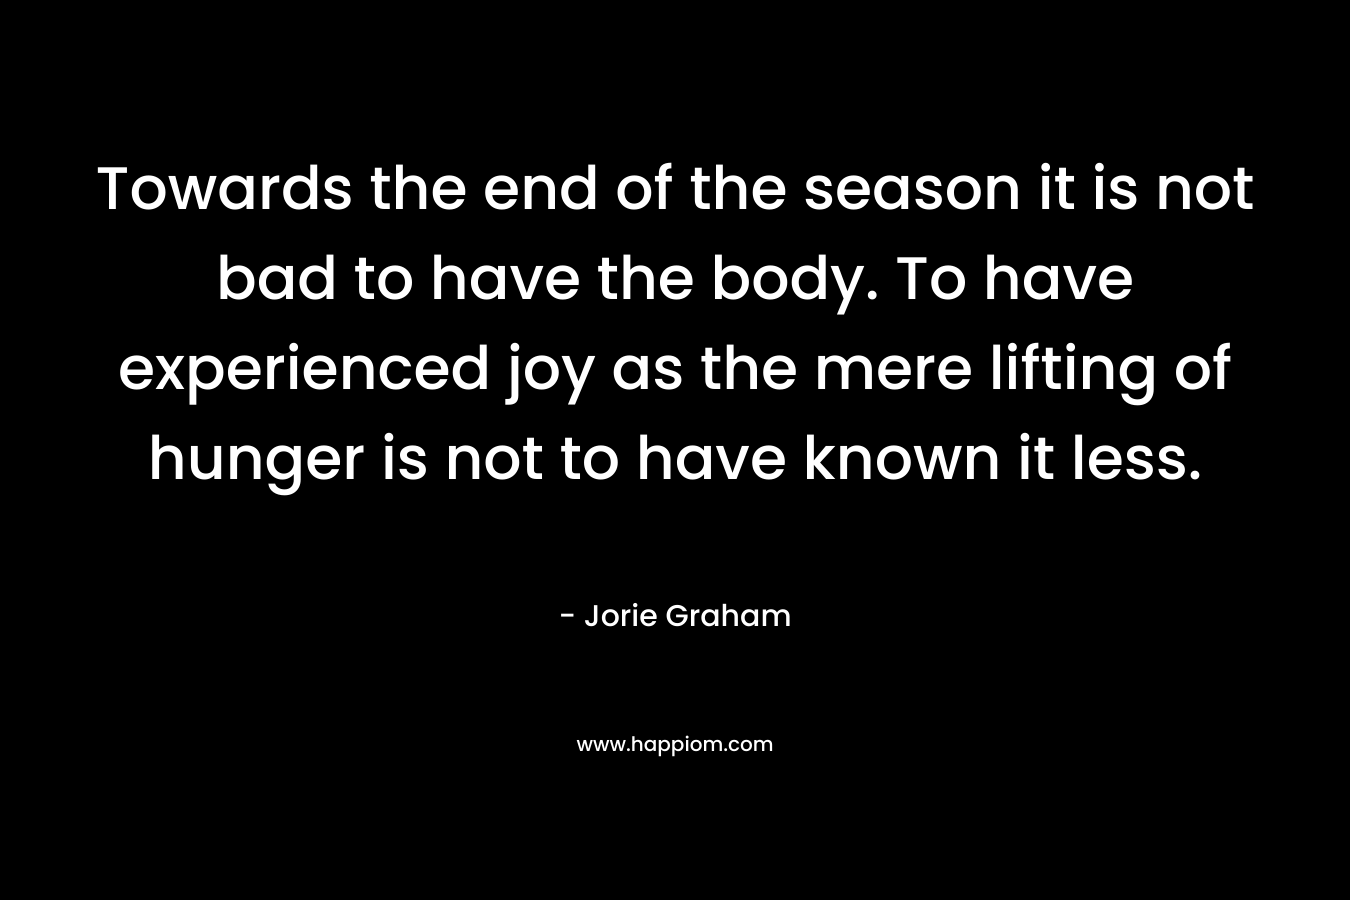 Towards the end of the season it is not bad to have the body. To have experienced joy as the mere lifting of hunger is not to have known it less. – Jorie Graham